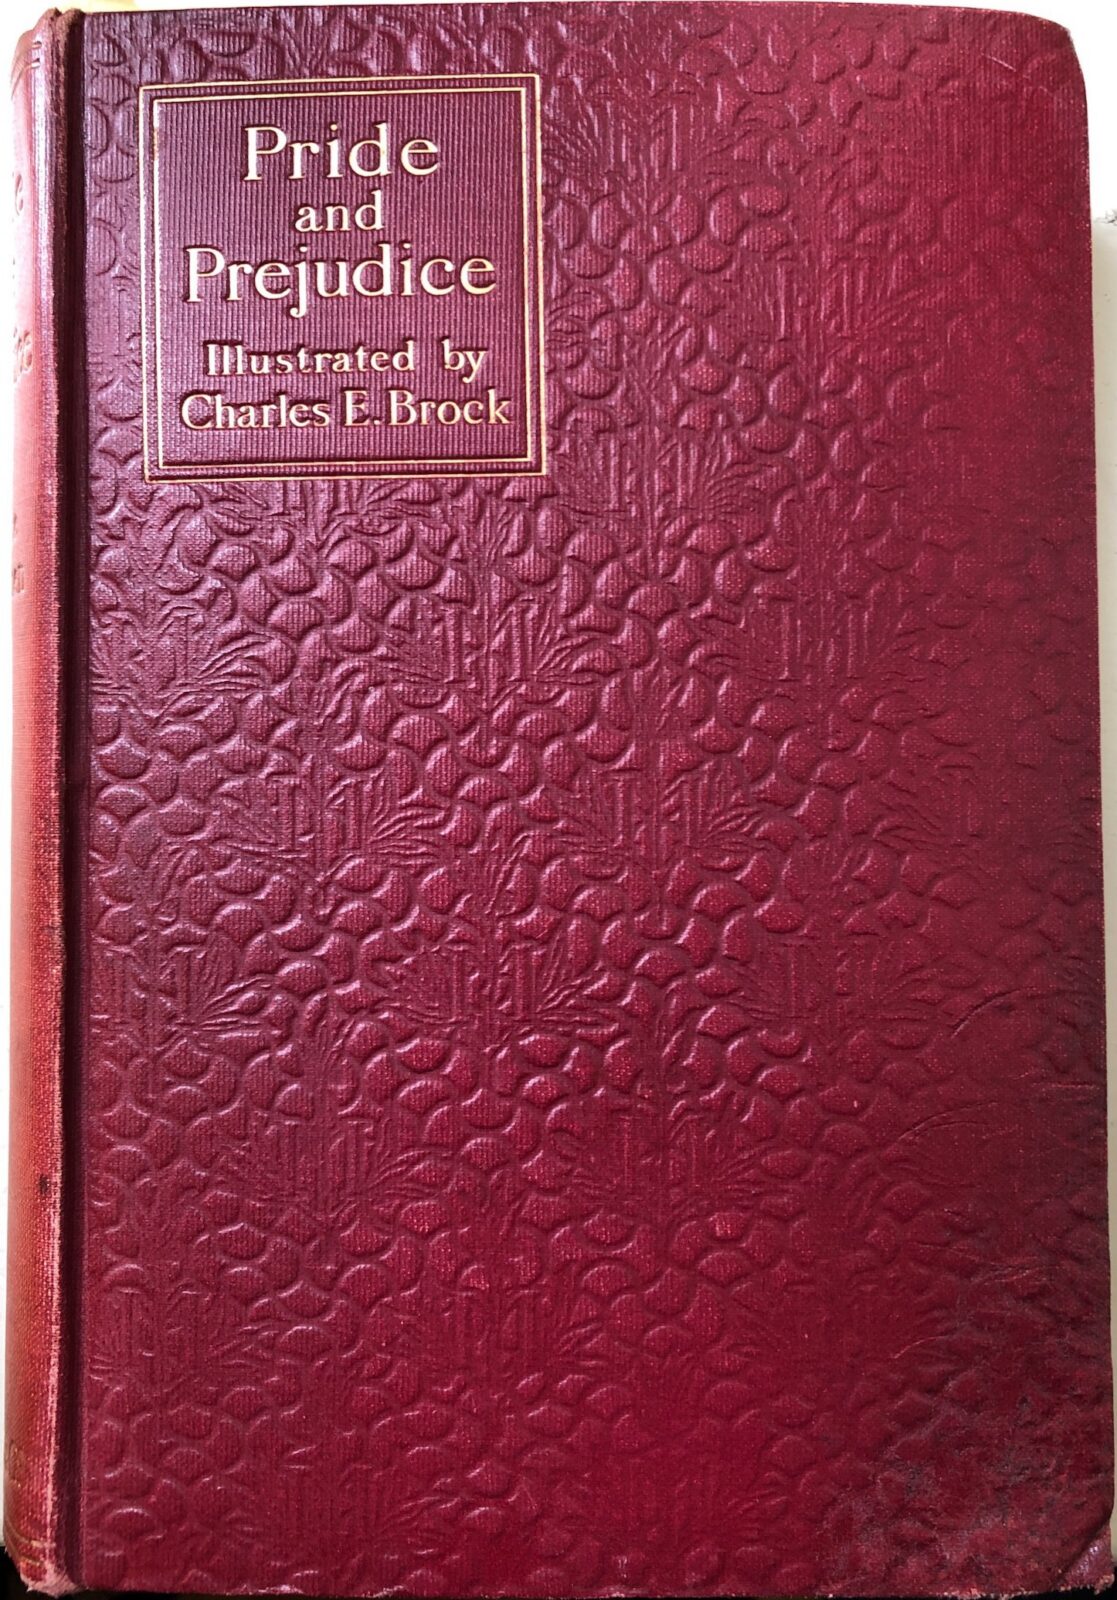 Front cover of  Pride & Prejudice, illustrated by Charles E. Brock 1895